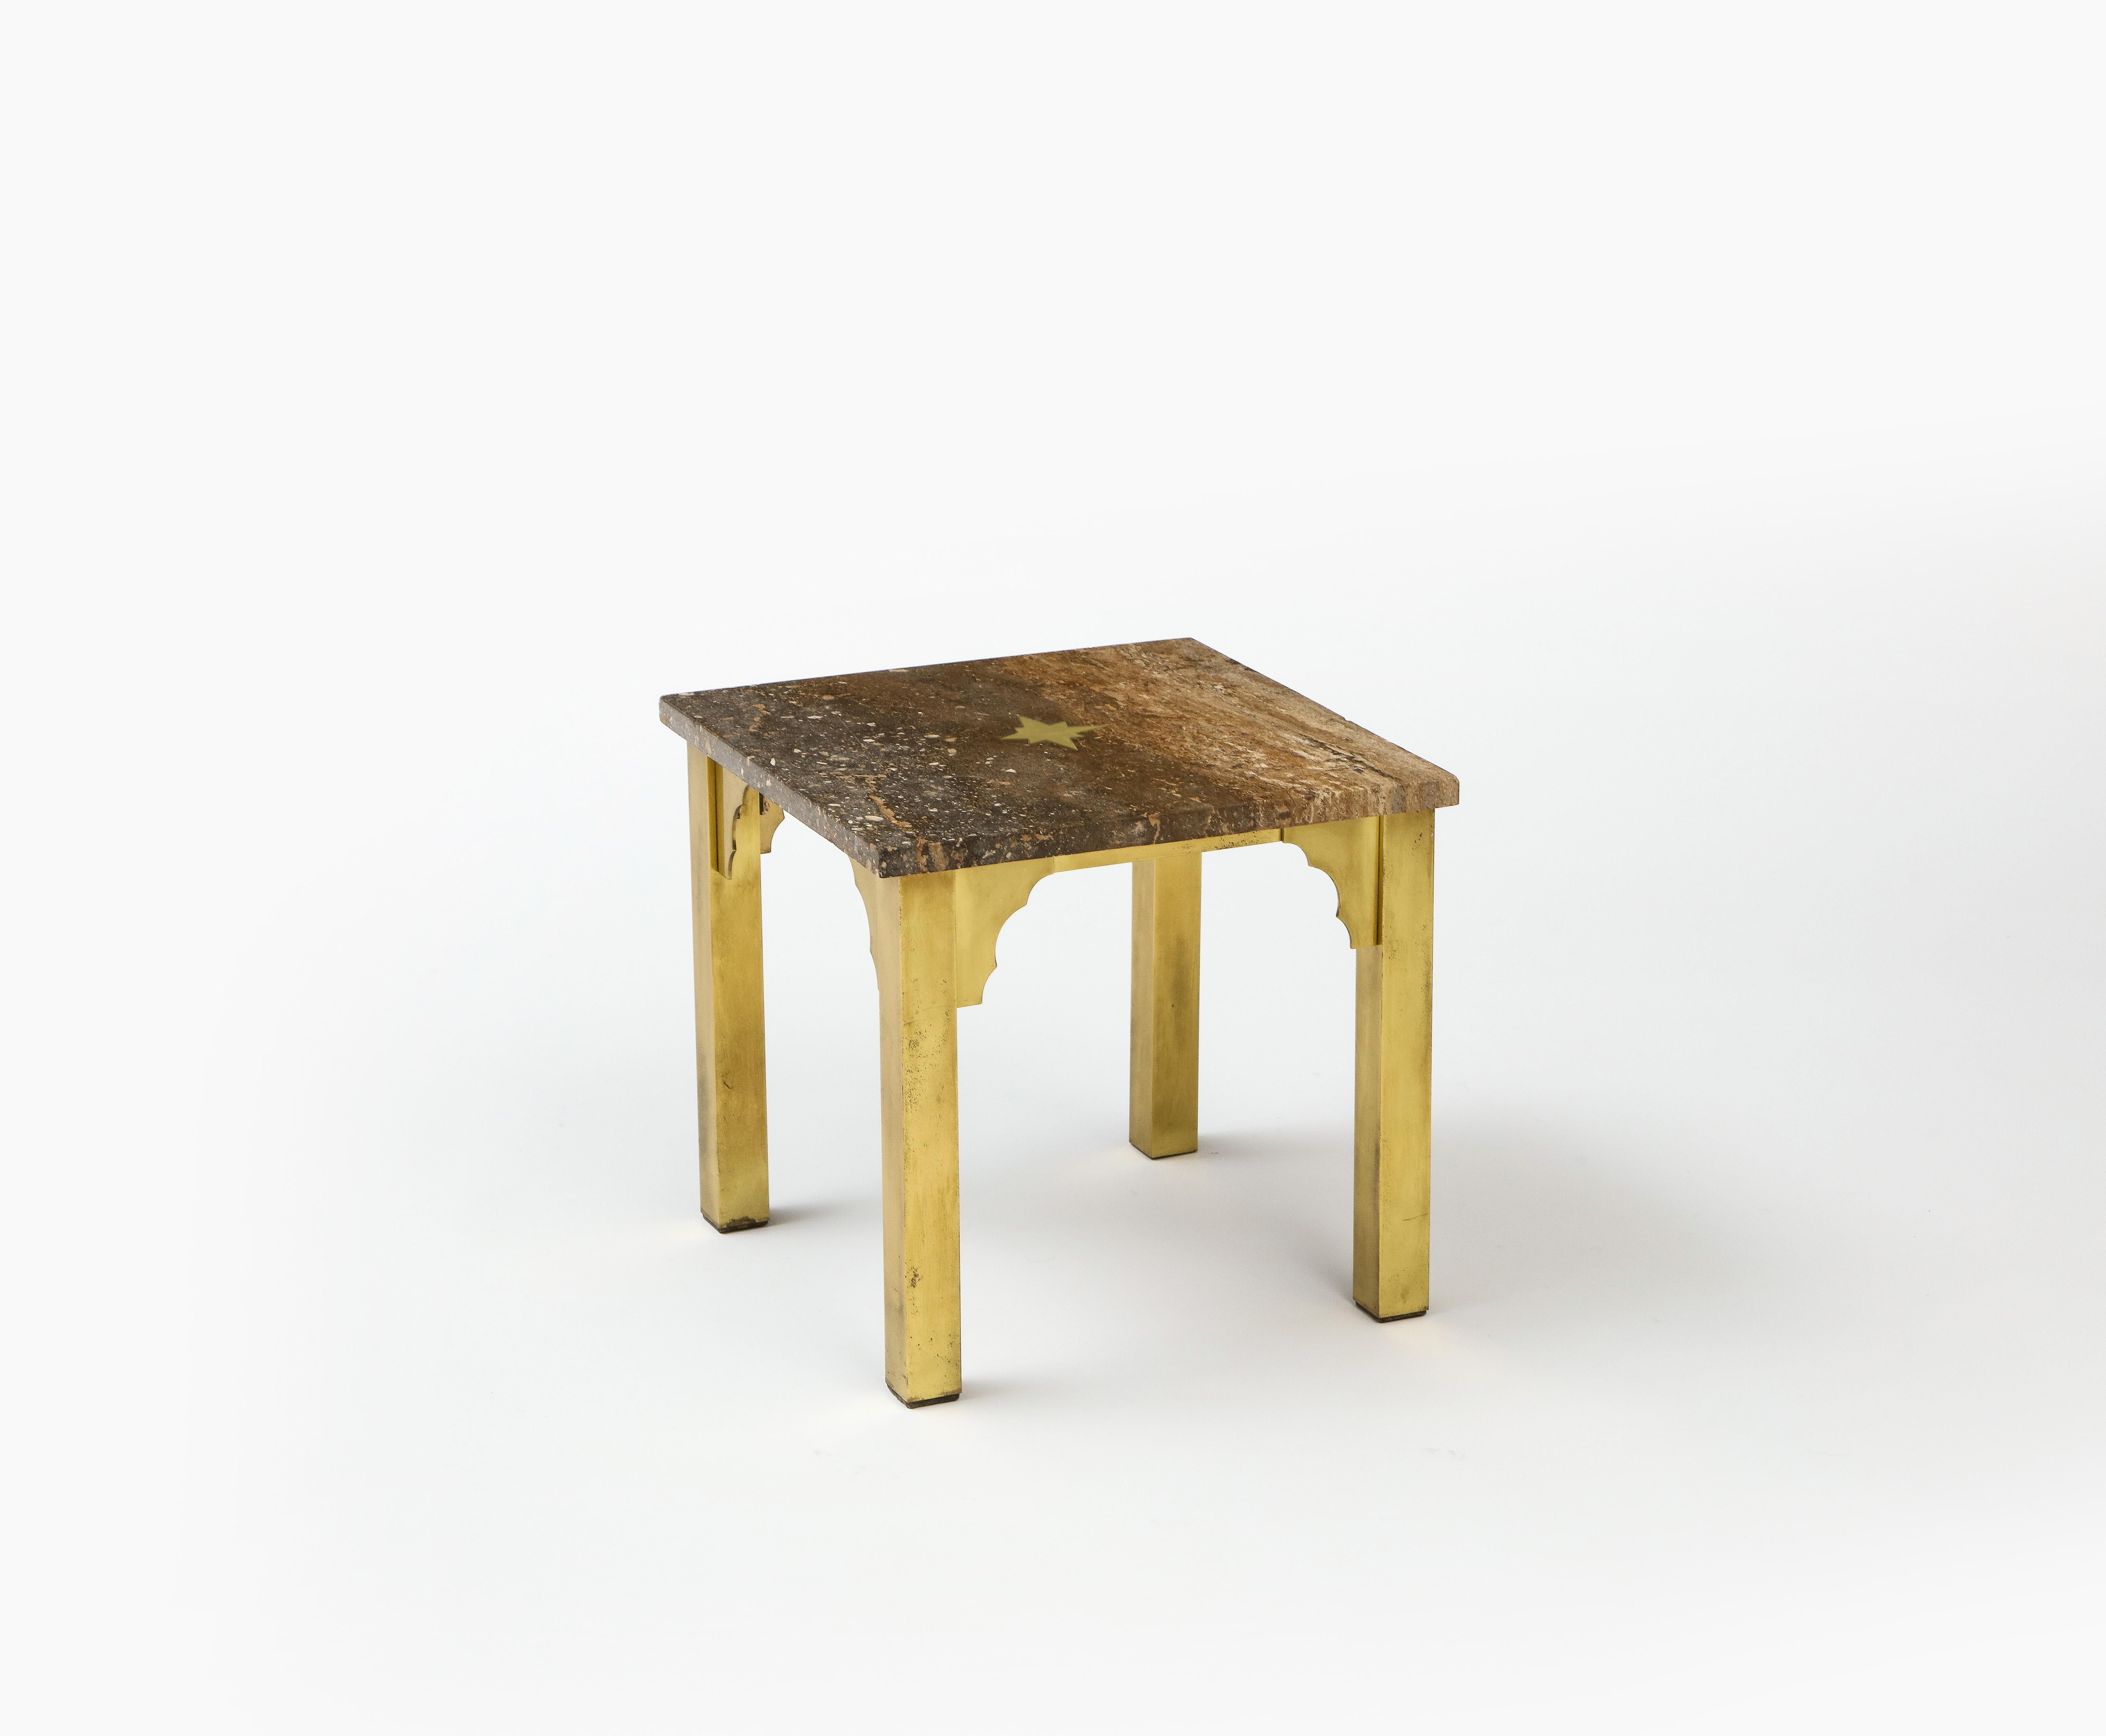 Small Square Table in Brass & Travertine, Inlay & Arabesque Details, USA 1960's For Sale 5